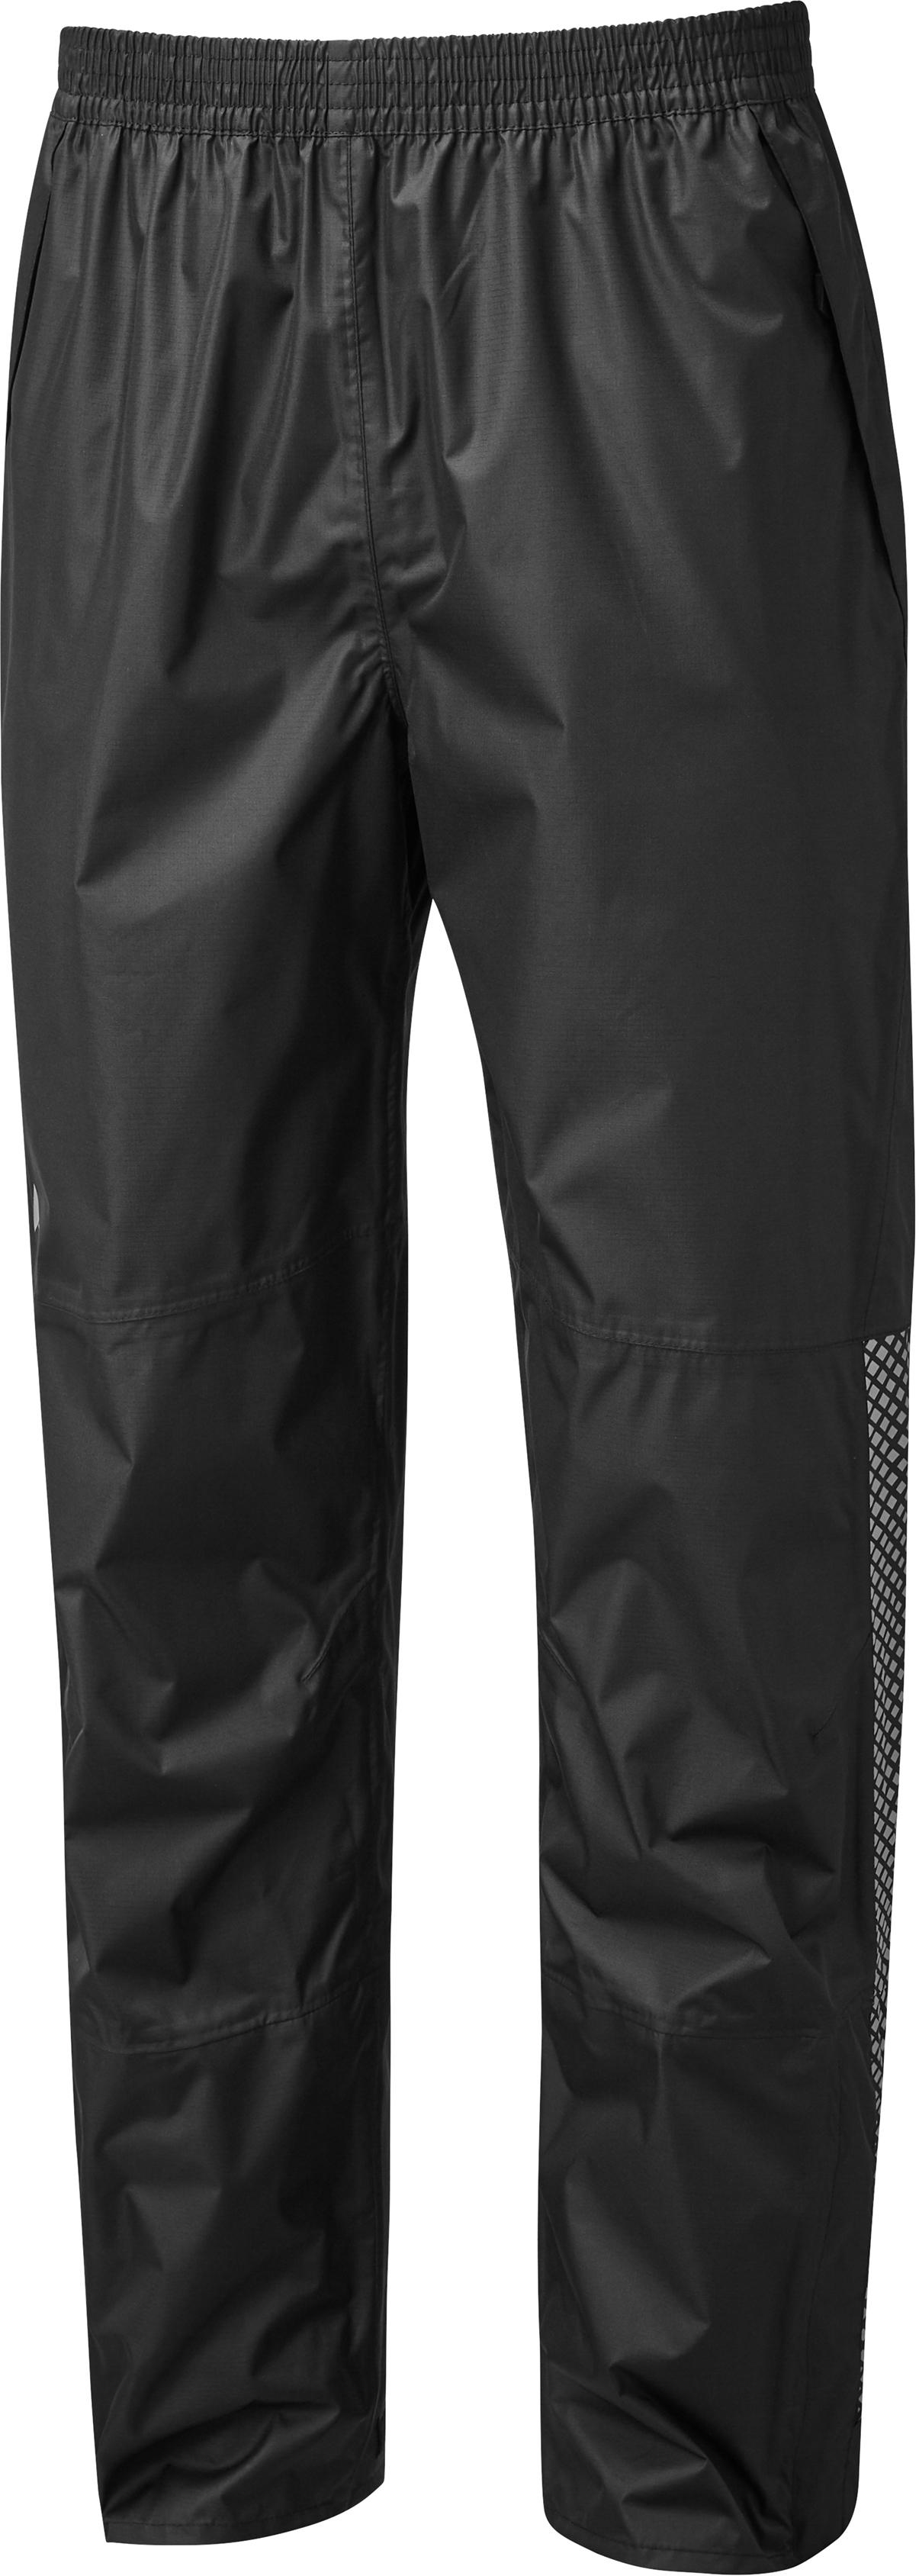 Altura Nightvision Waterproof Overtrouser Black X Large